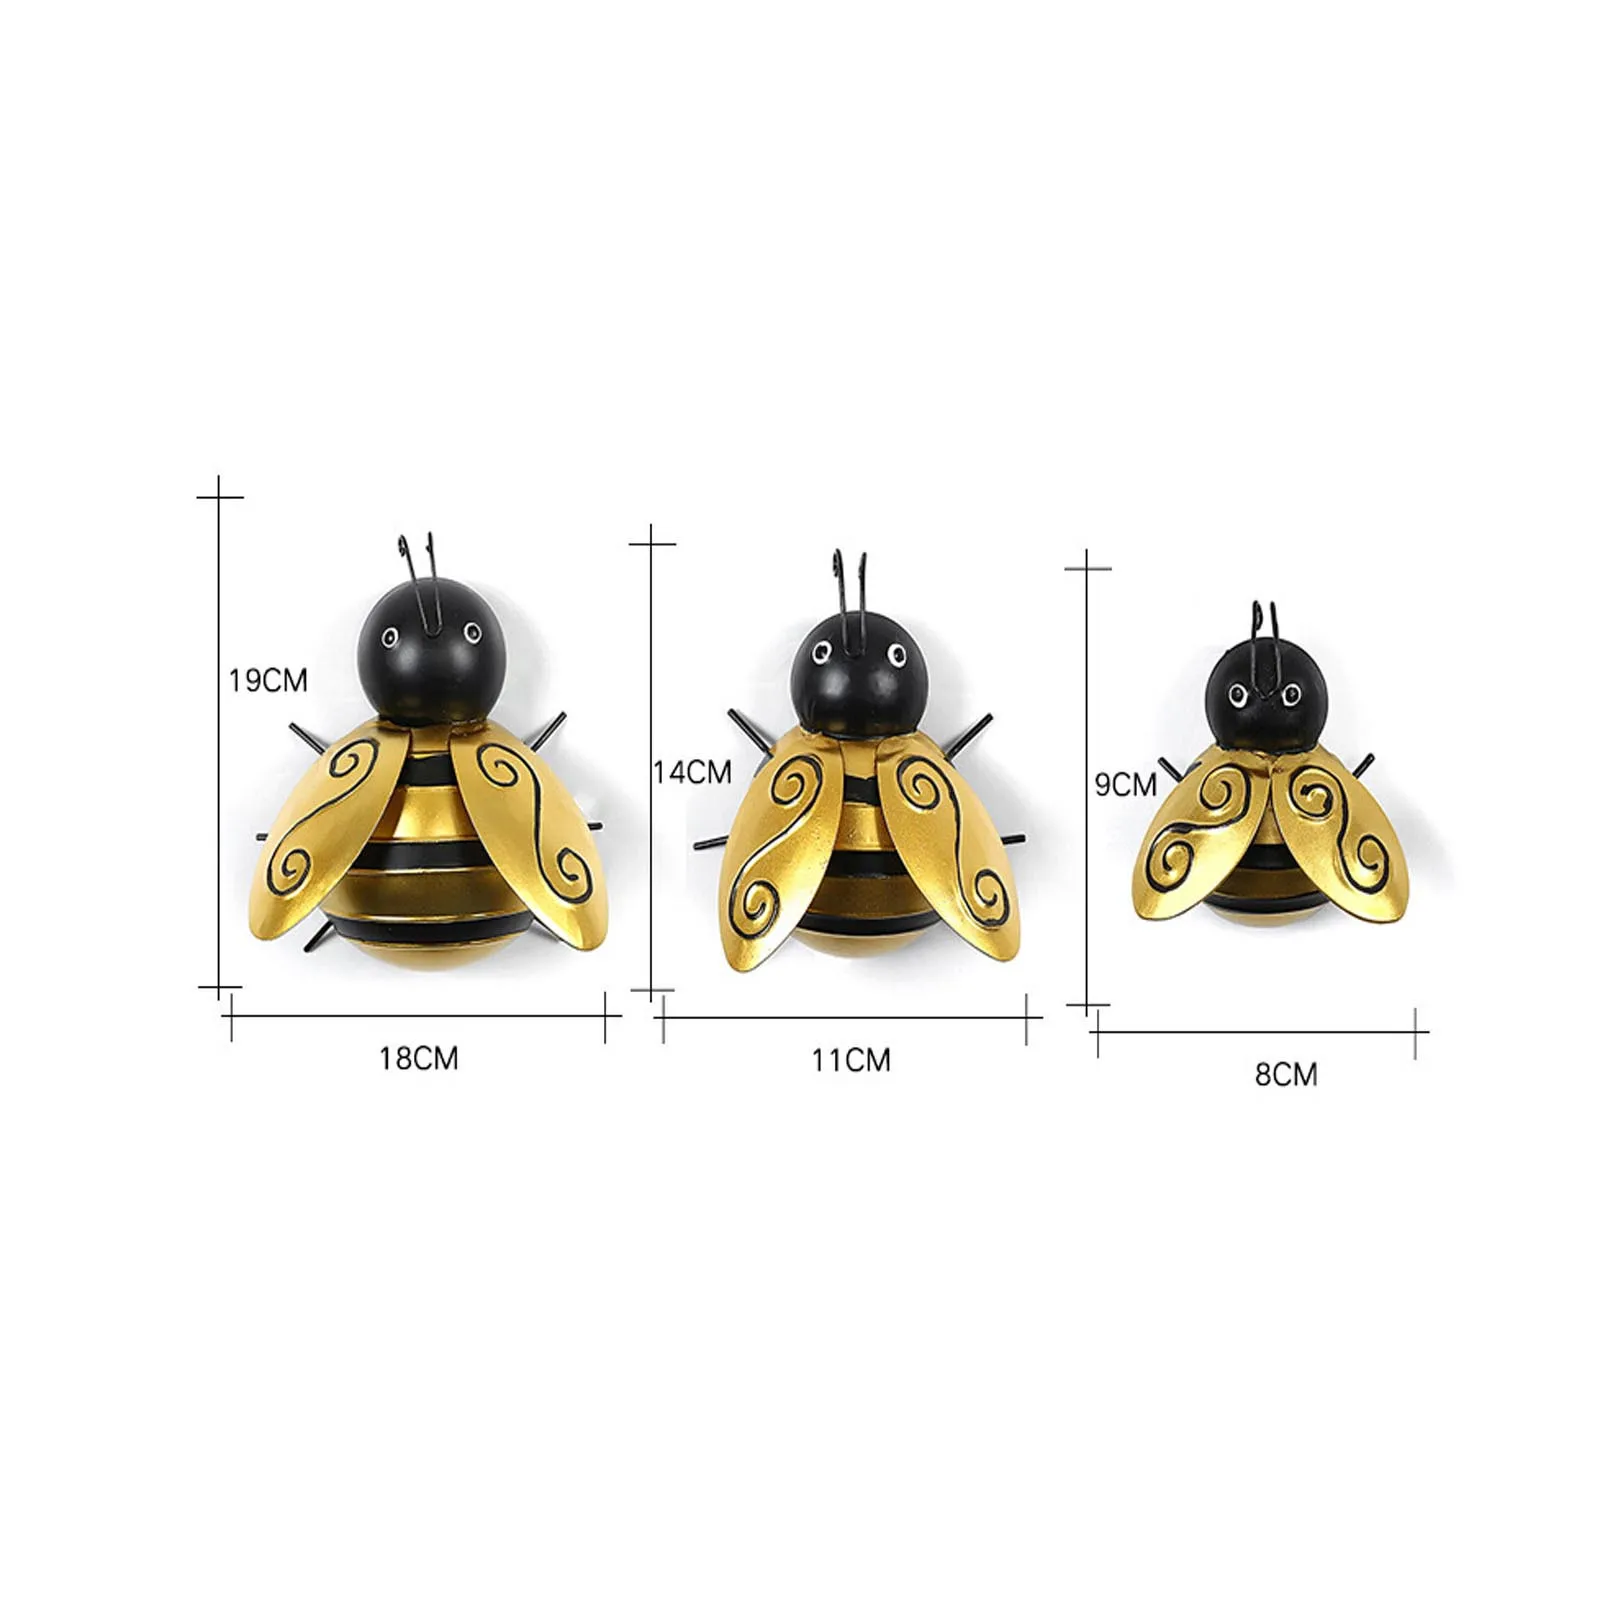 

1/4pcs Collection Decorative Metal Bumble Bee Garden Accents Lawn Ornaments Garden Decoration Outdoor Supplies Figurines